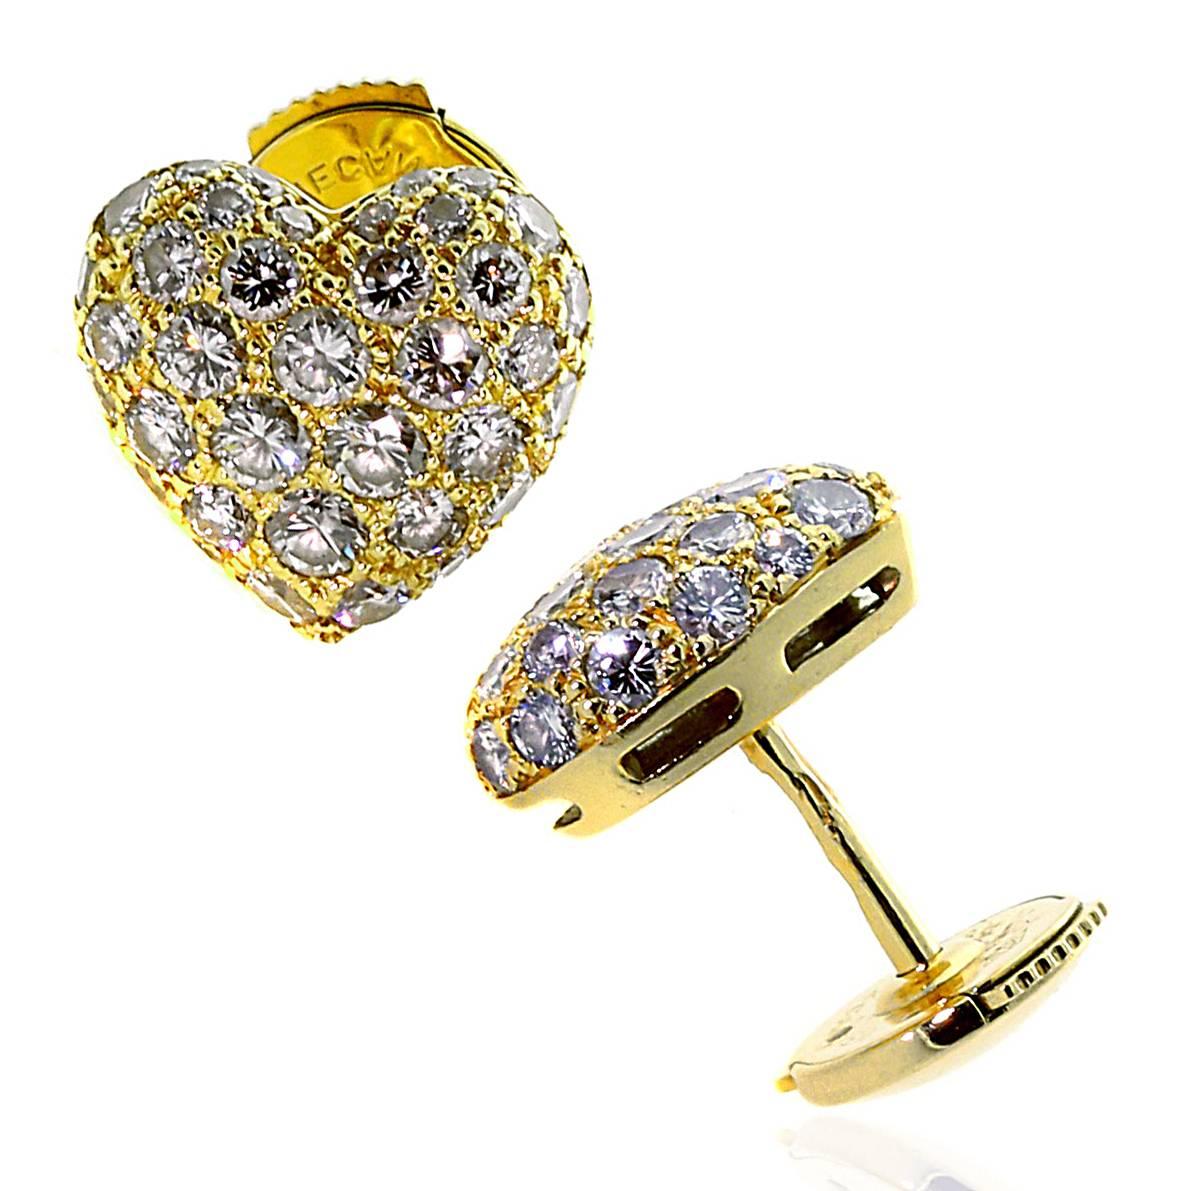 A chic pair of Cartier heart earrings set with 1.5cts appx of finest Cartier round brilliant cut diamonds in 18k yellow gold. The earrings measures .39" in diameter.

Cartier Retail $15,000 + Tax

